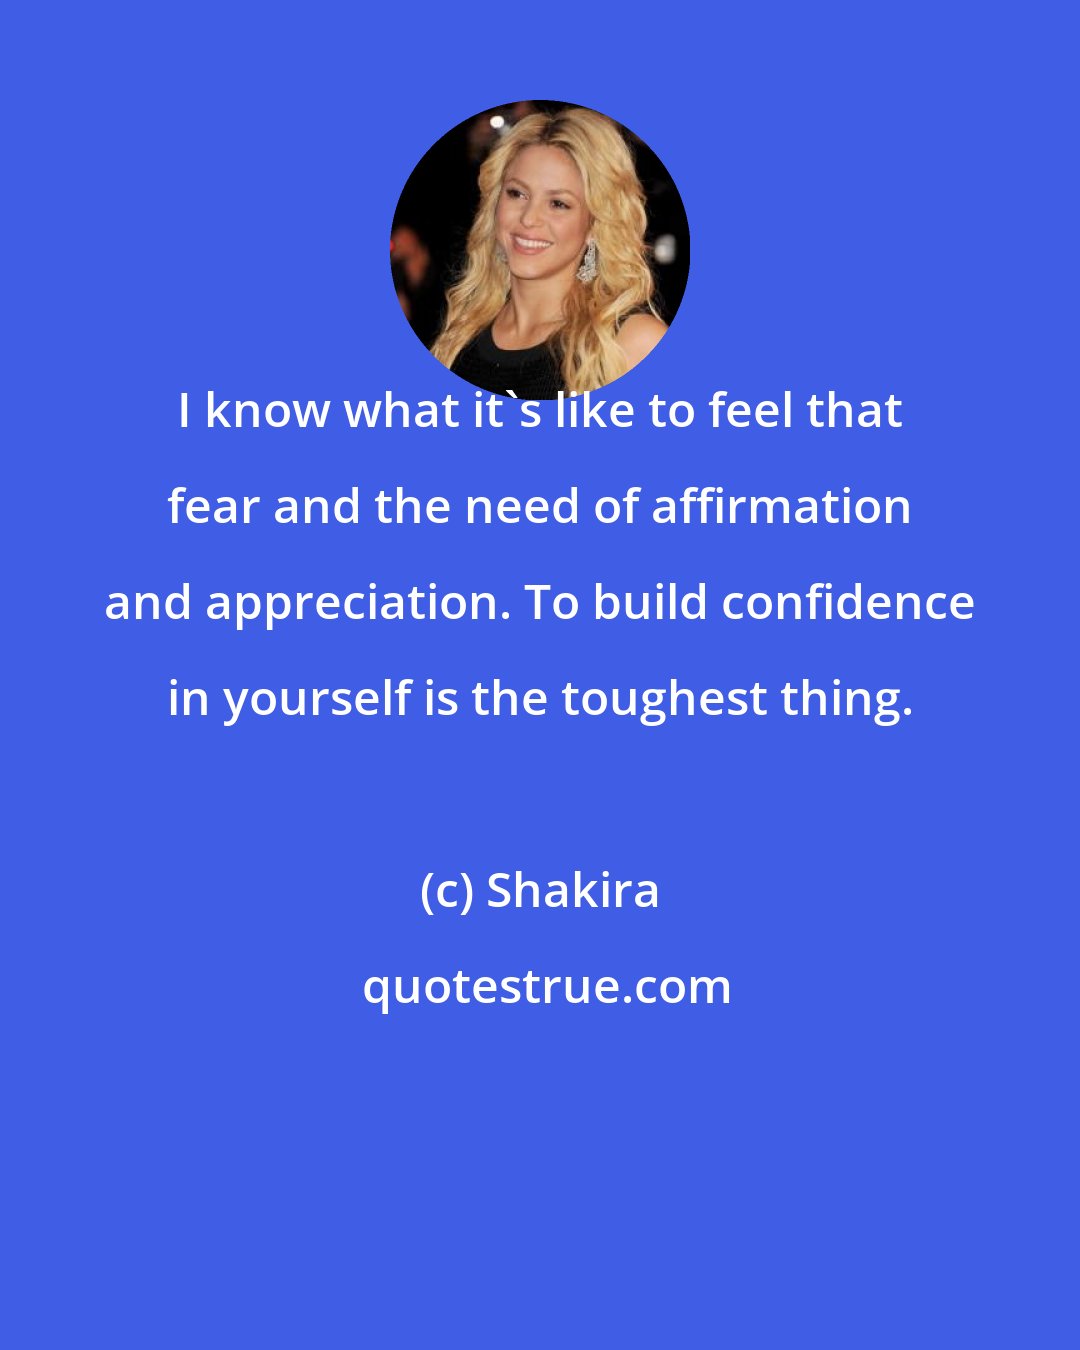 Shakira: I know what it's like to feel that fear and the need of affirmation and appreciation. To build confidence in yourself is the toughest thing.